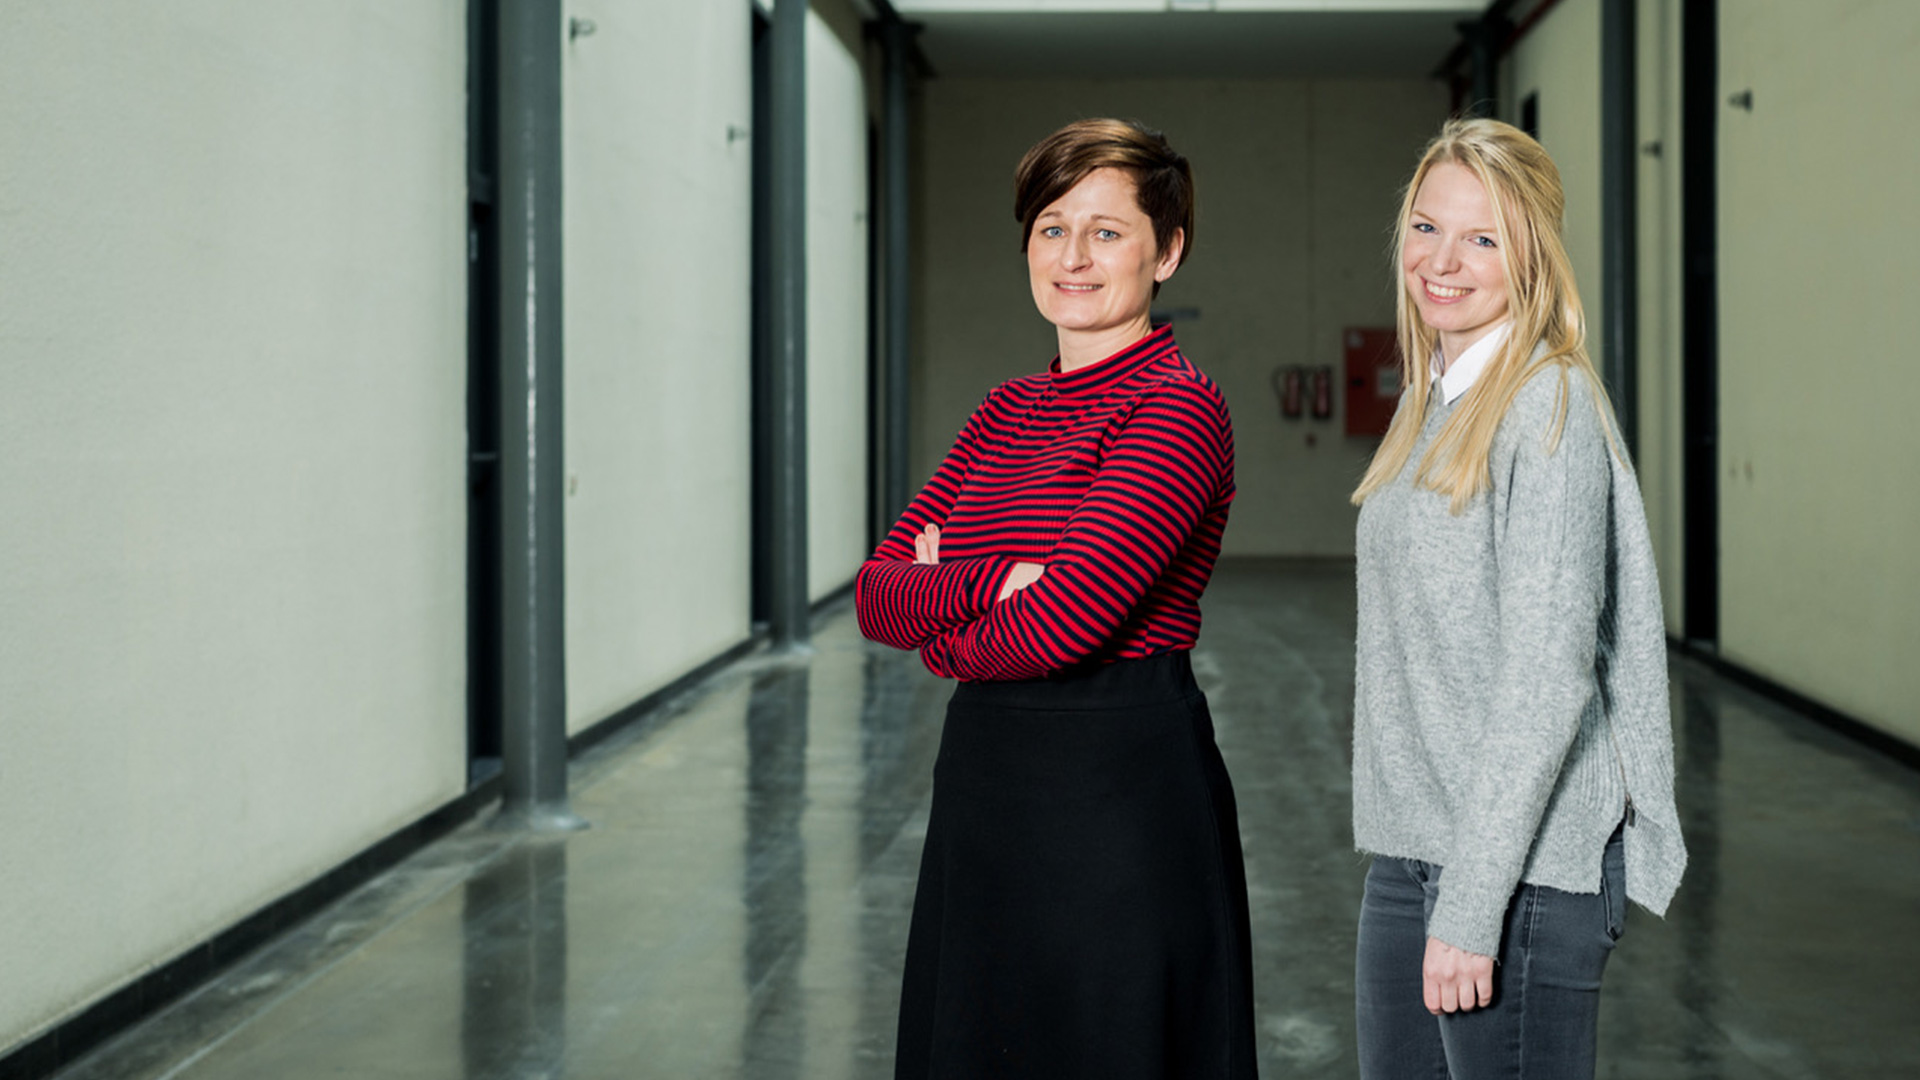 Pop-Up Communities by Research Director Lies Vandaele and Research Executive Sofie Vromant